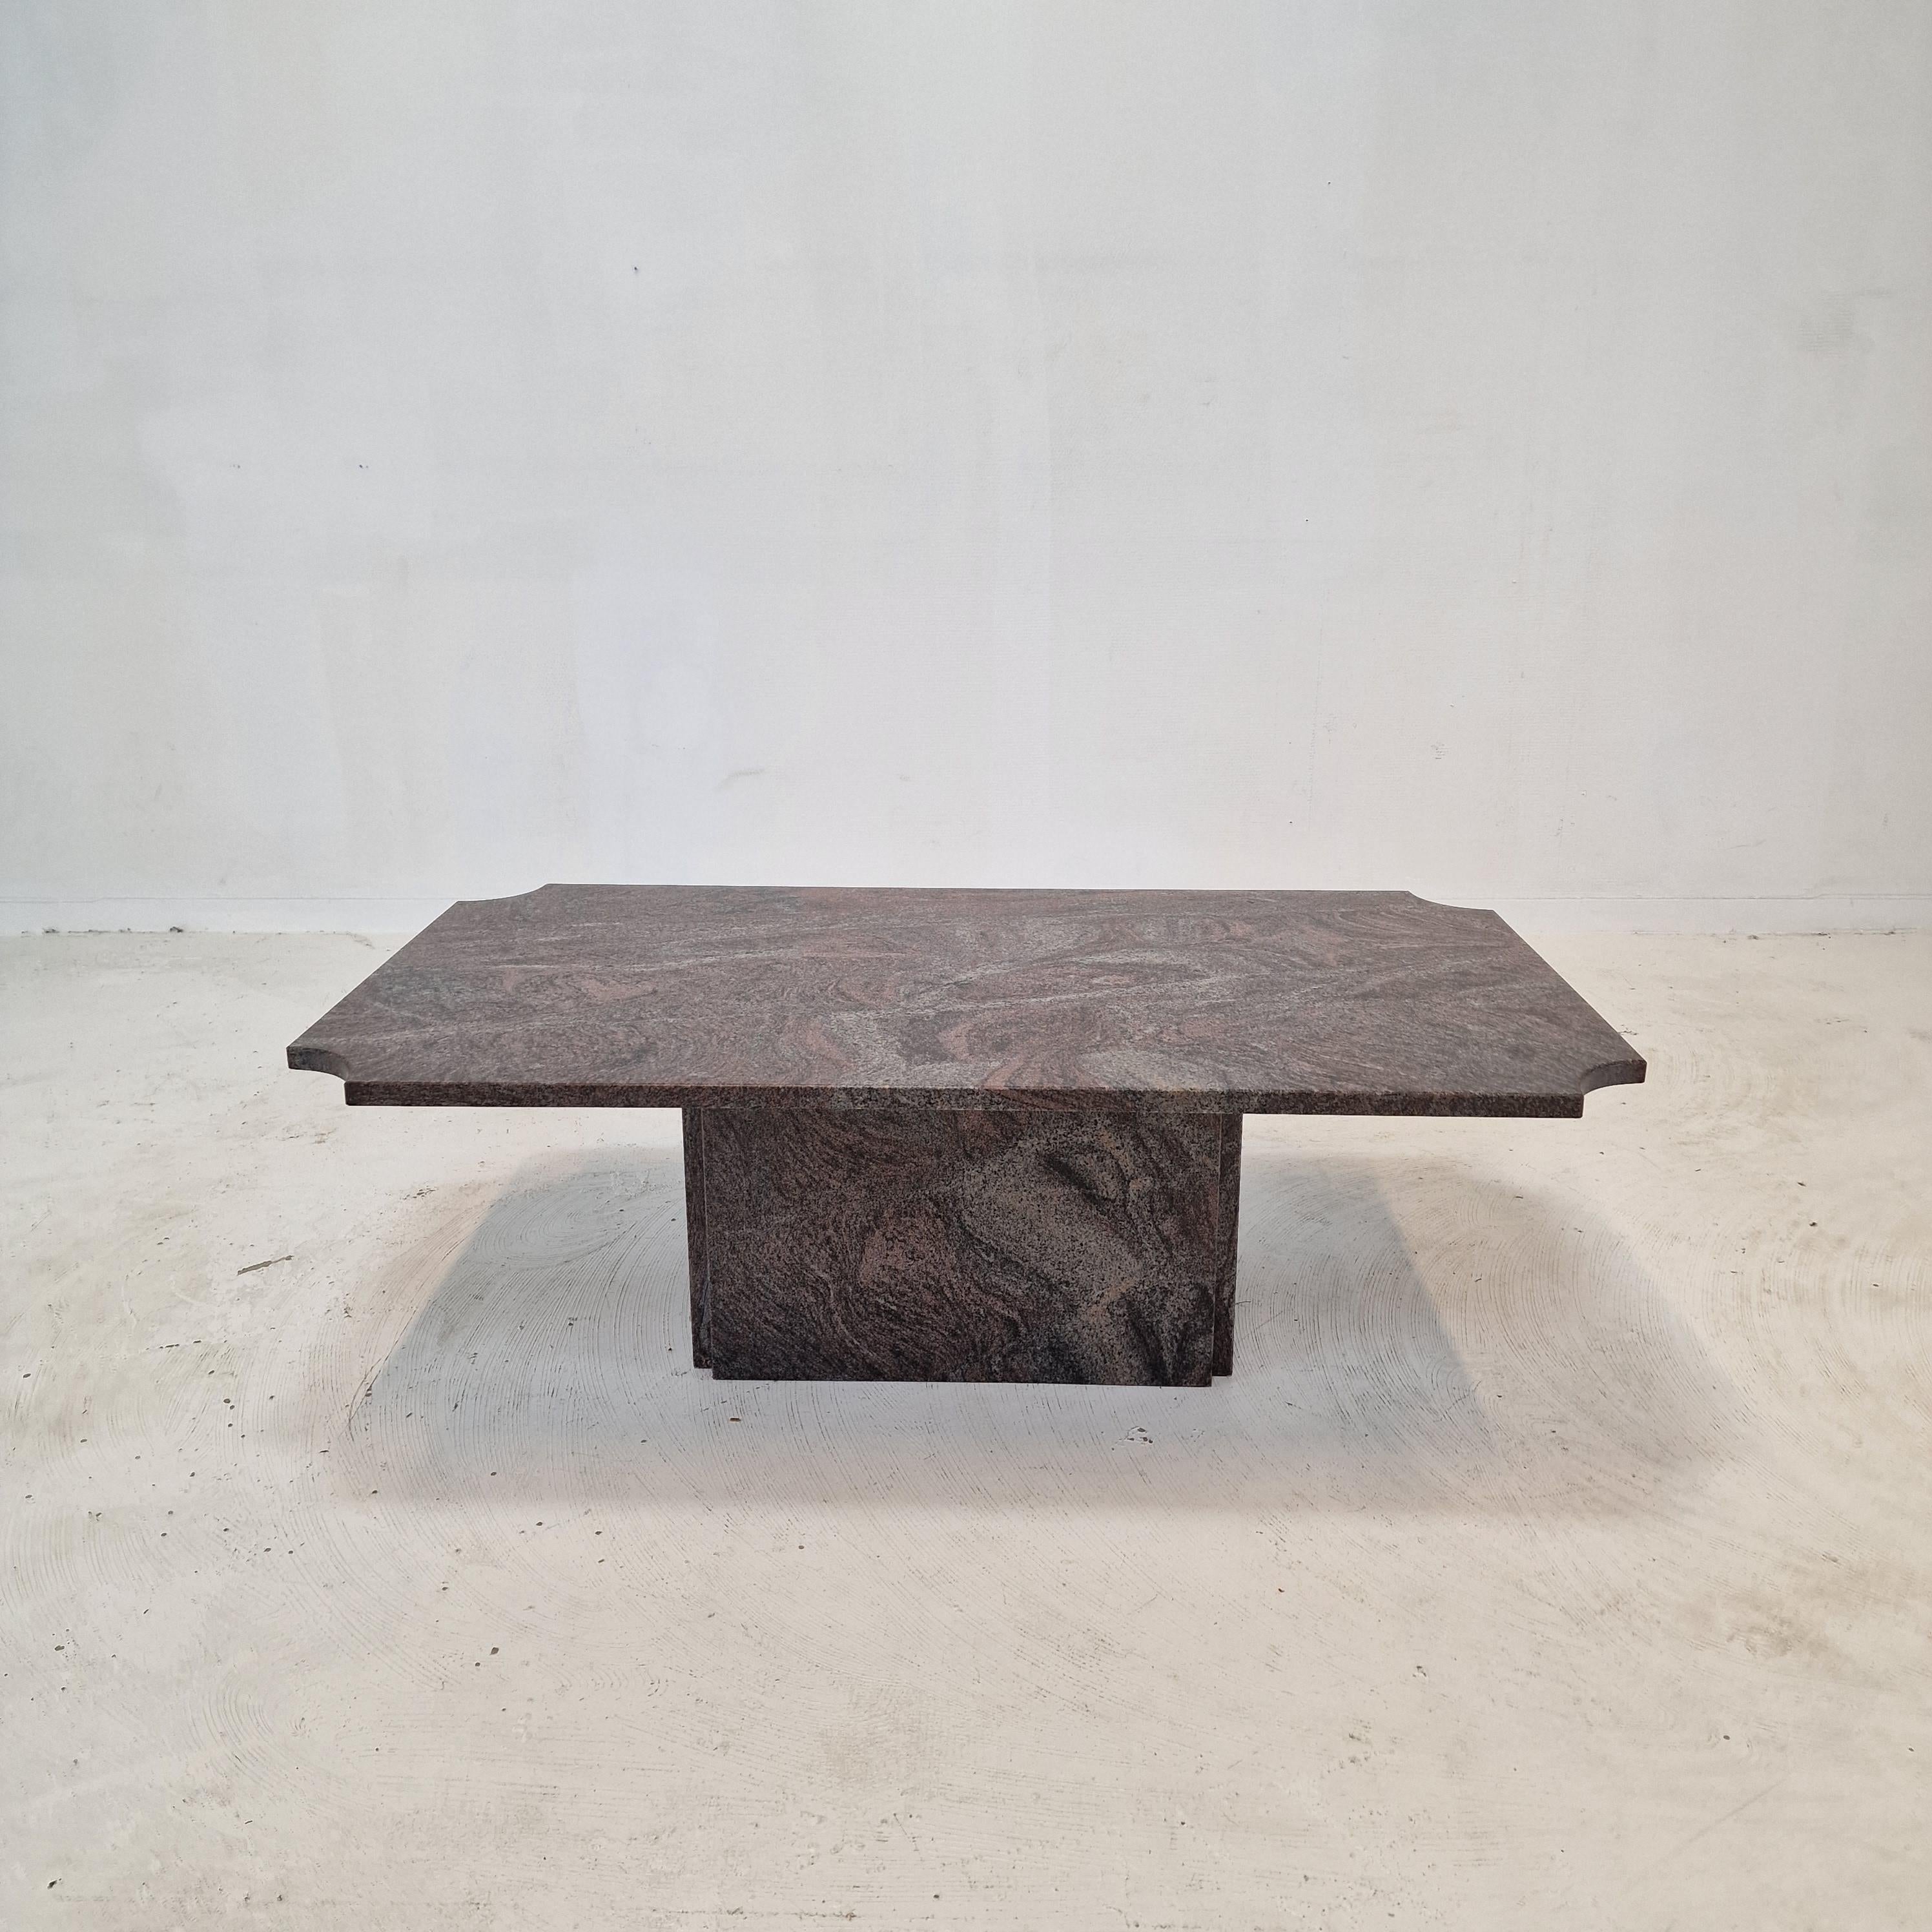 Very nice Italian coffee table handcrafted out of granite, 1980s.

It is made of beautiful granite.
Please take notice of the very nice patterns.

The table is in very good condition, see the pictures.

We work with professional packers and